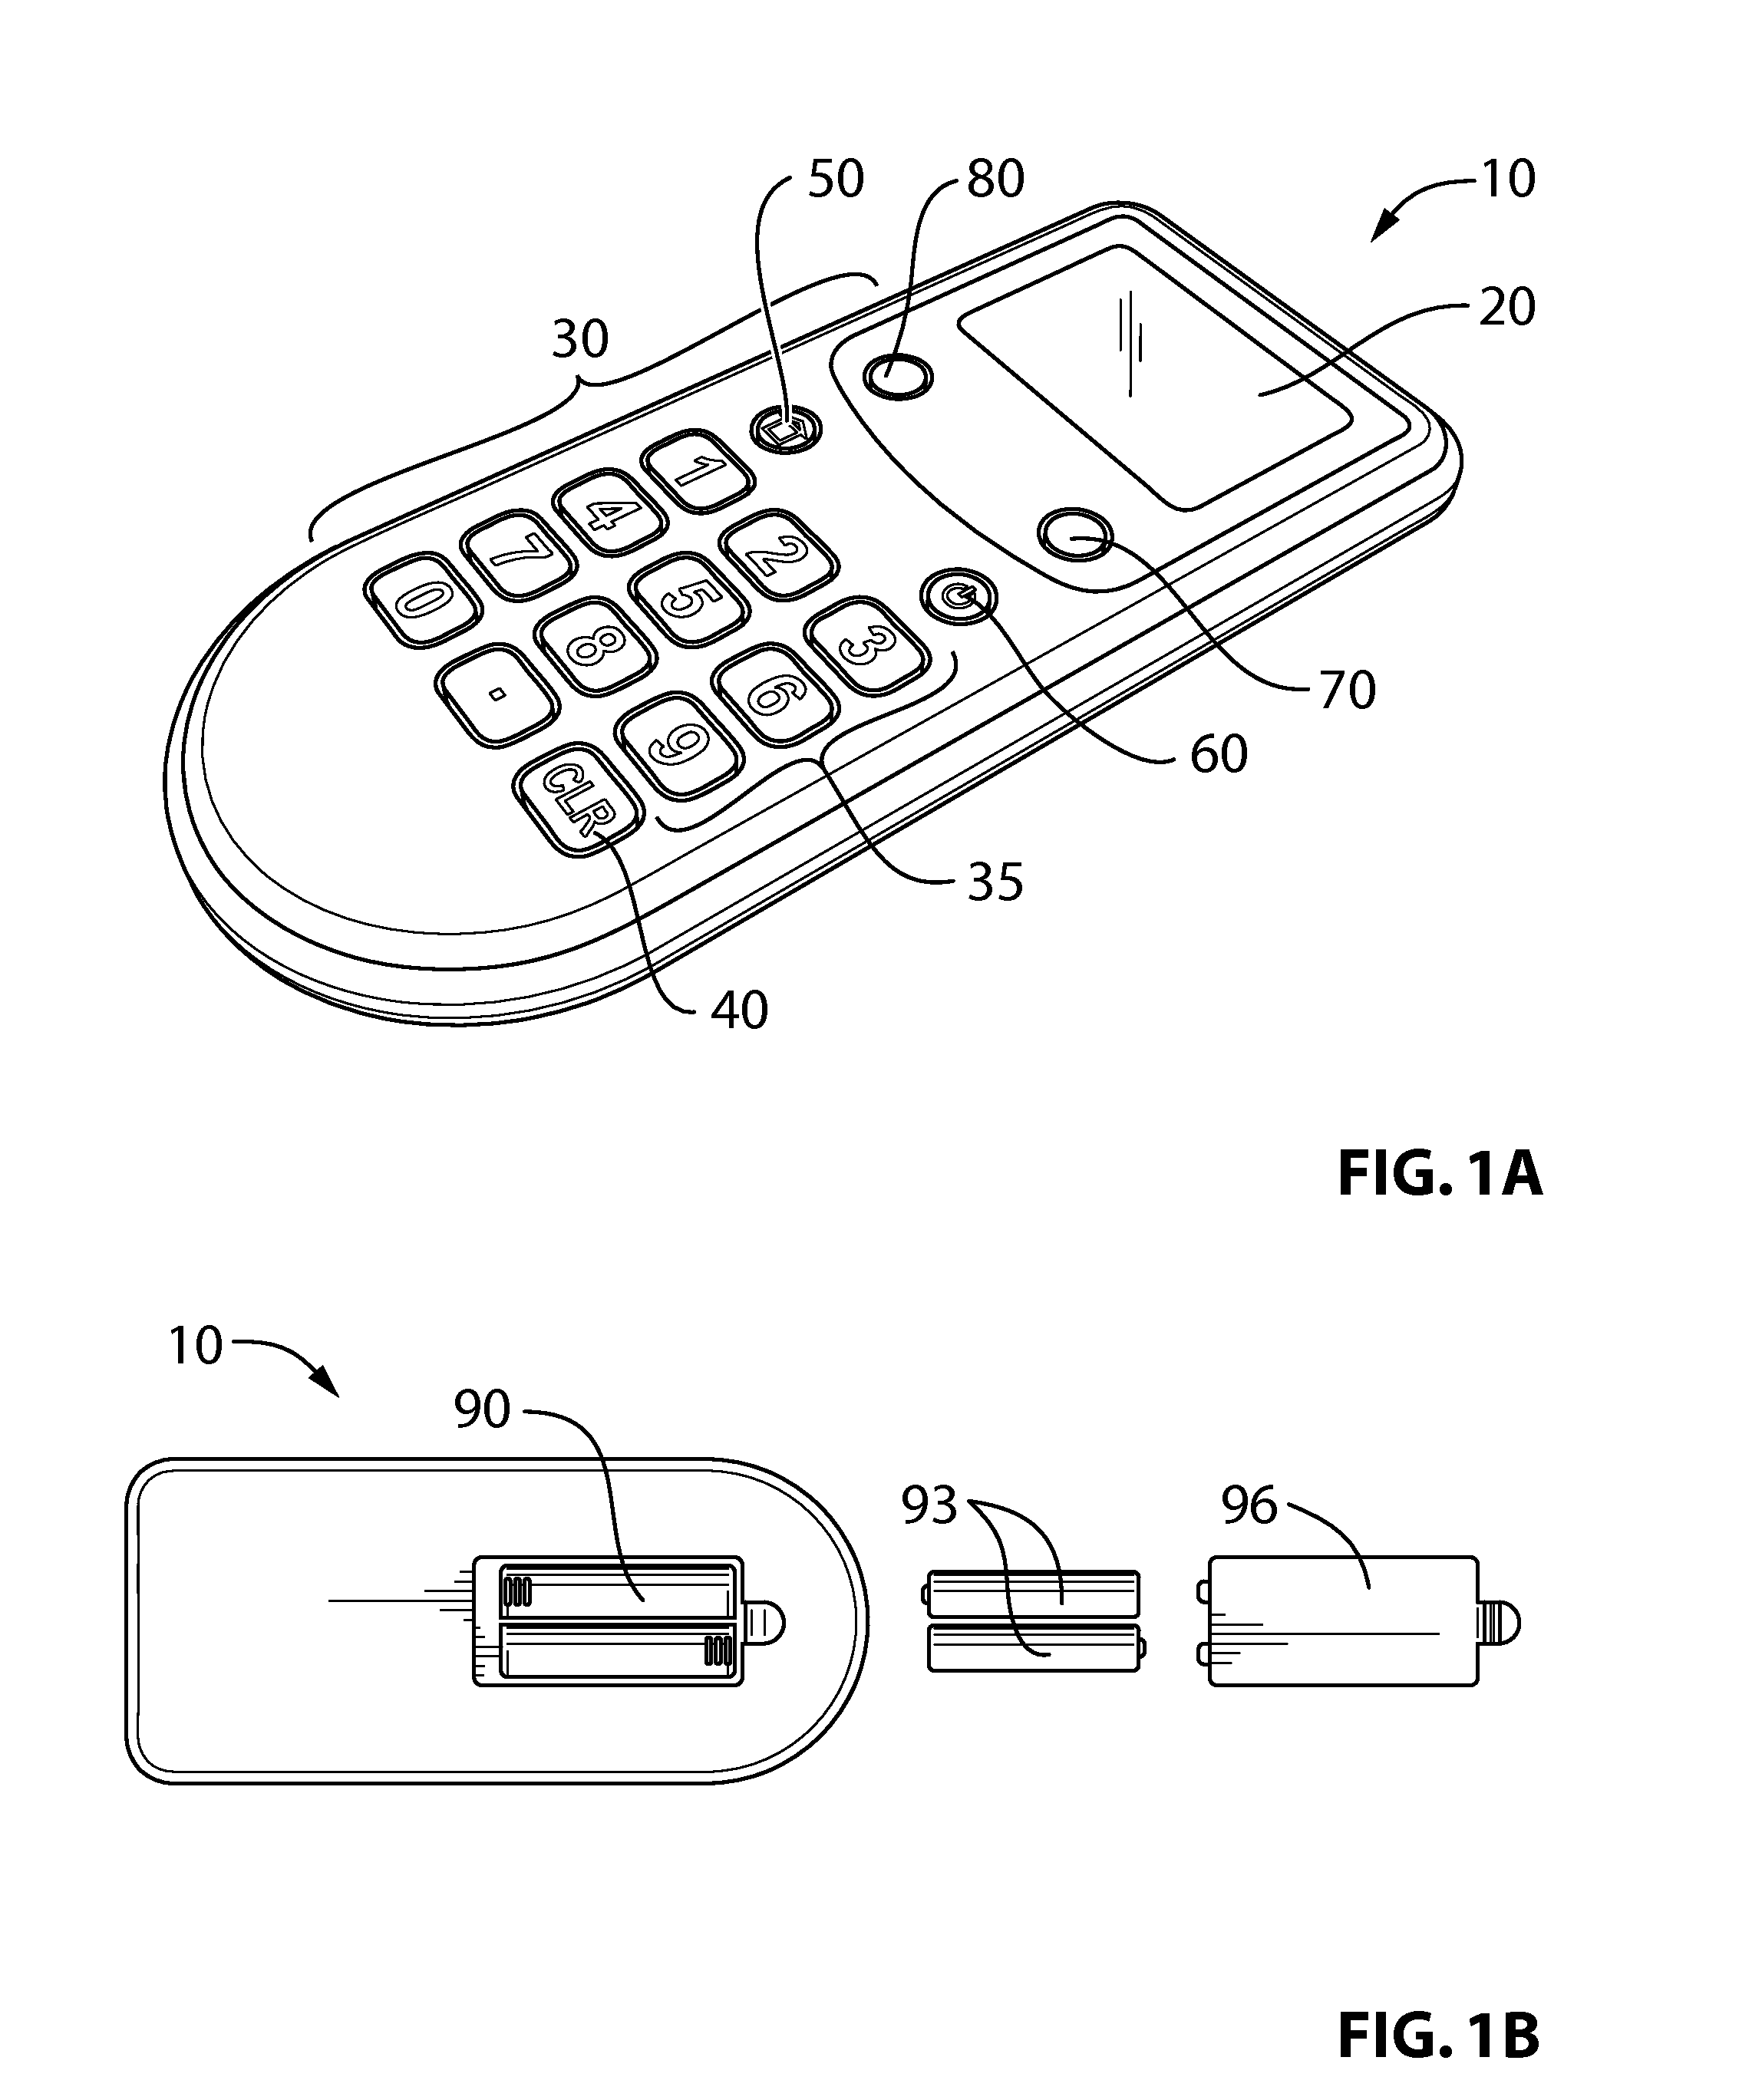 Portable Electronic Financial Calculator and Method of Calculating Financial Information